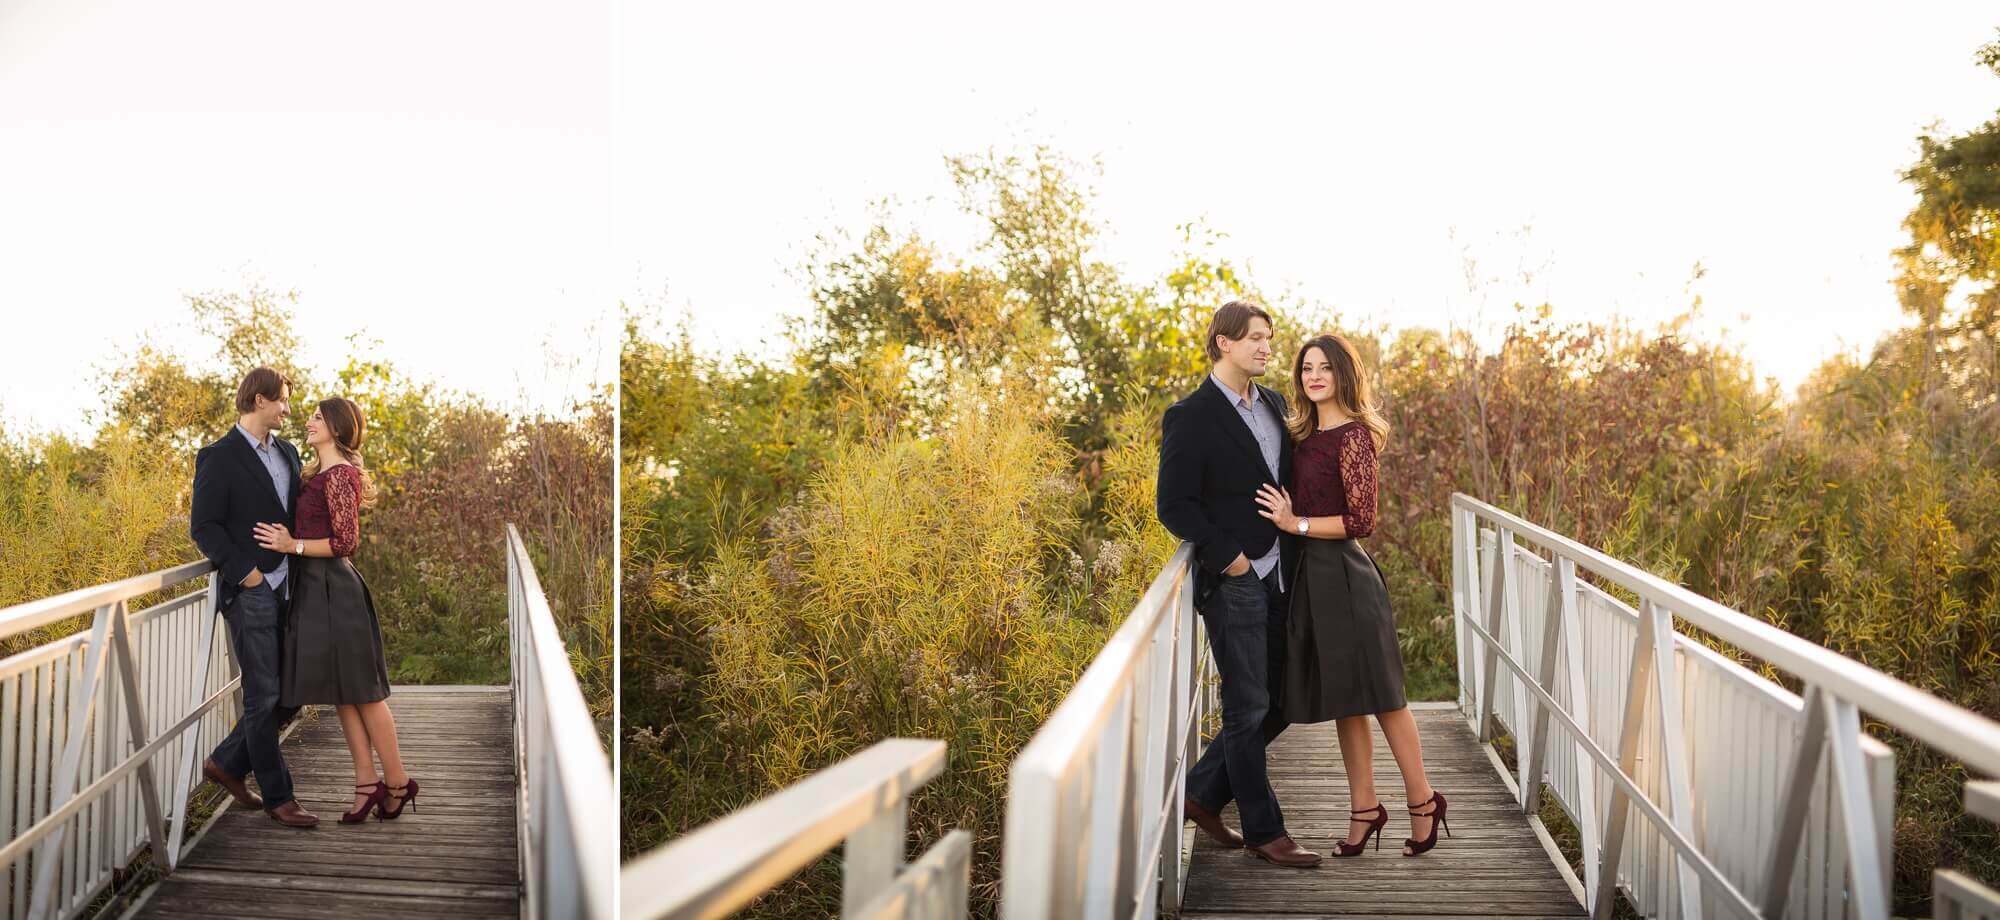 Elegant bridge pose for an engagement session at Scarborough Bluffs in Toronto